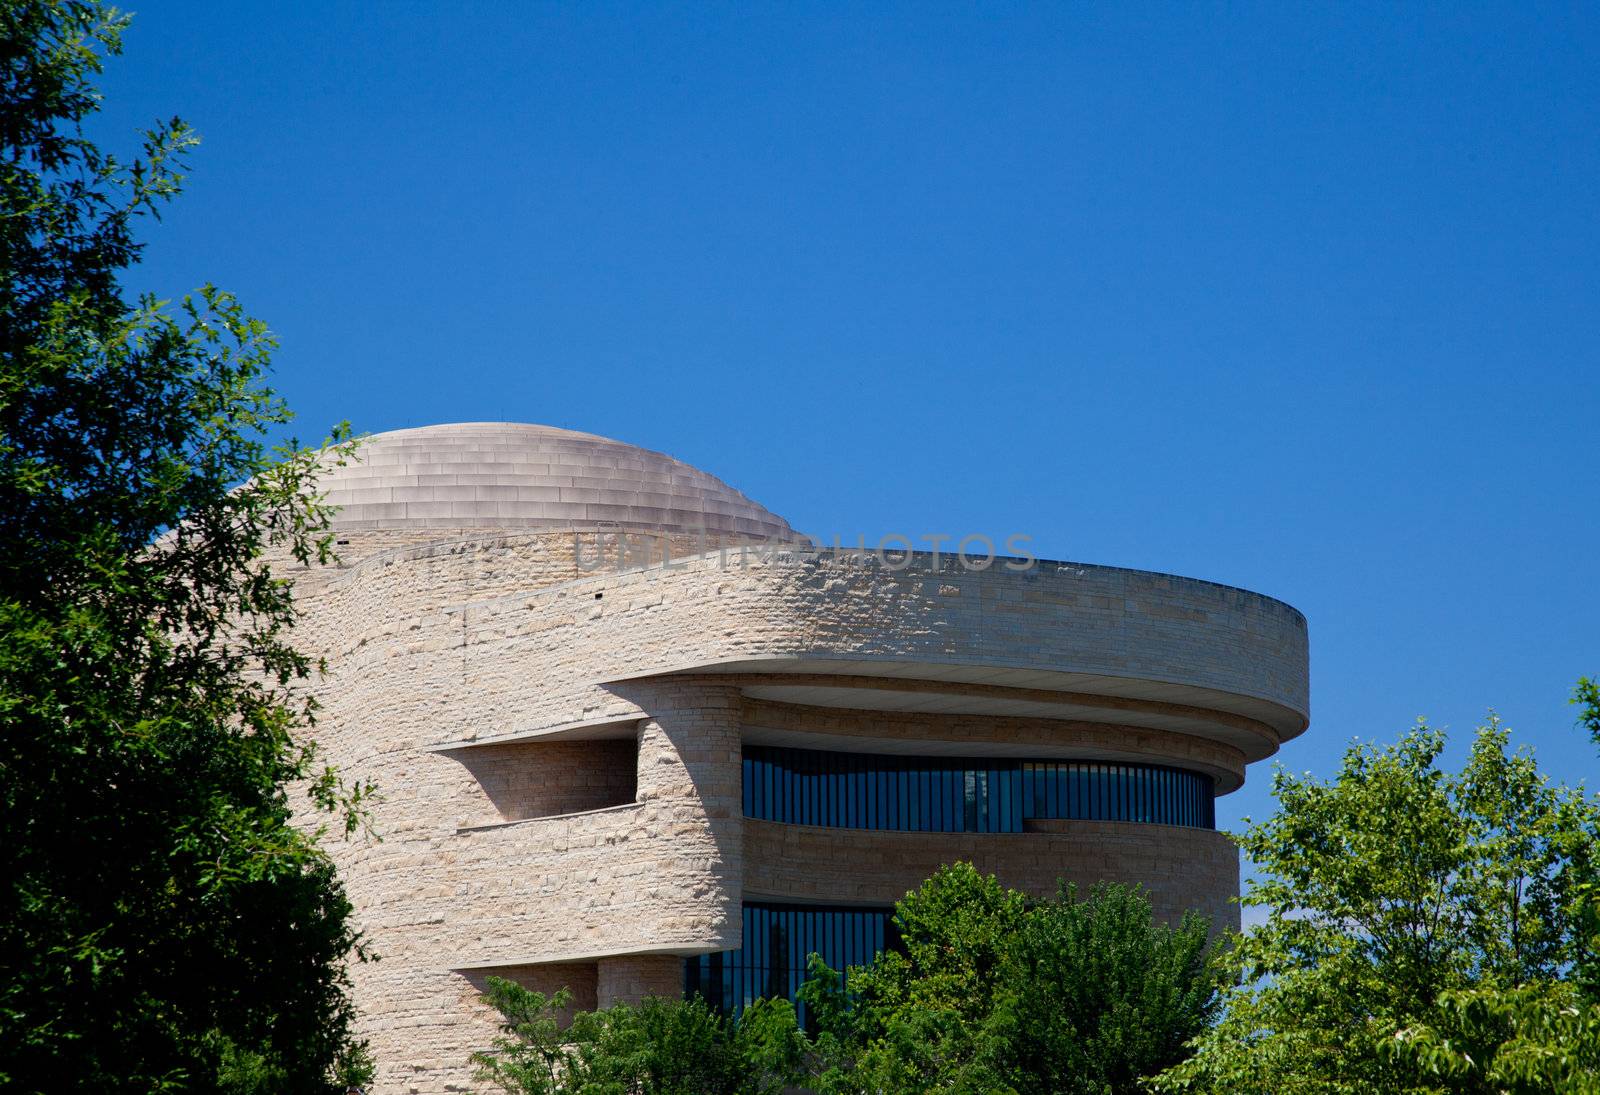 Museum of American Indian by steheap